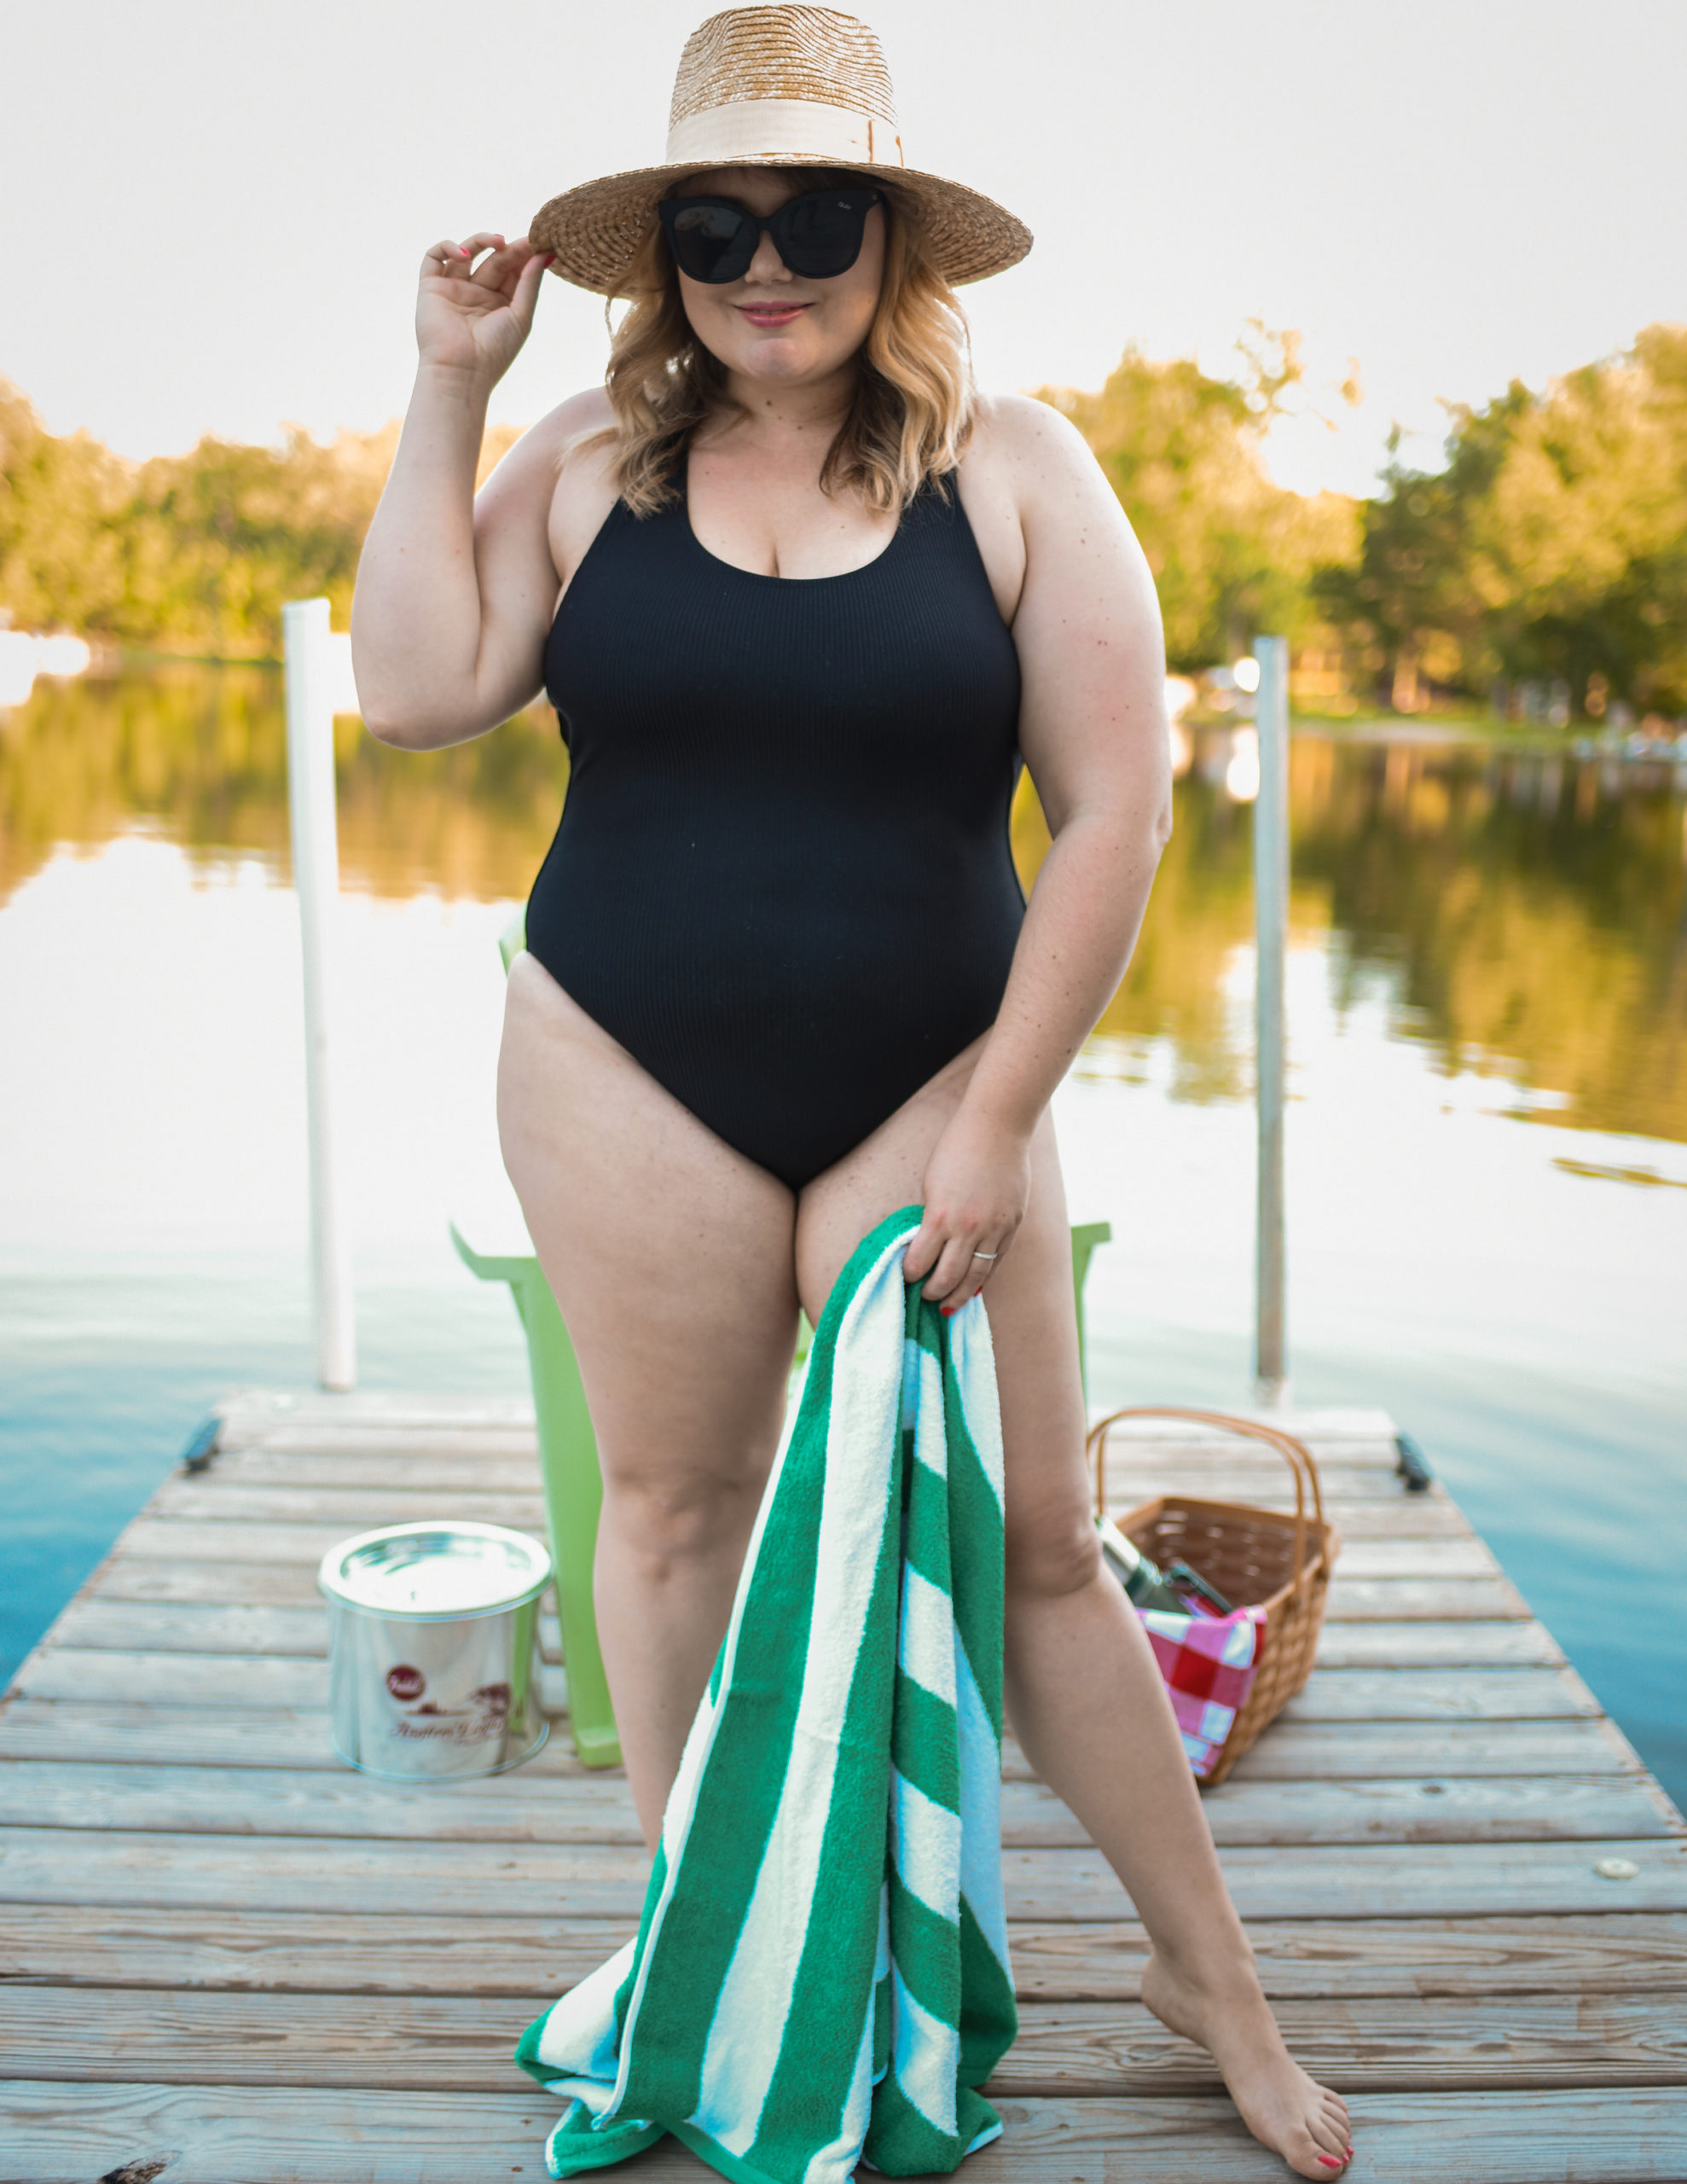 Lake Life With Andie Swim. Andie Swim is a size inclusive swim brand that creates quaility suits for every woman. I am featuring three one piece suits. 